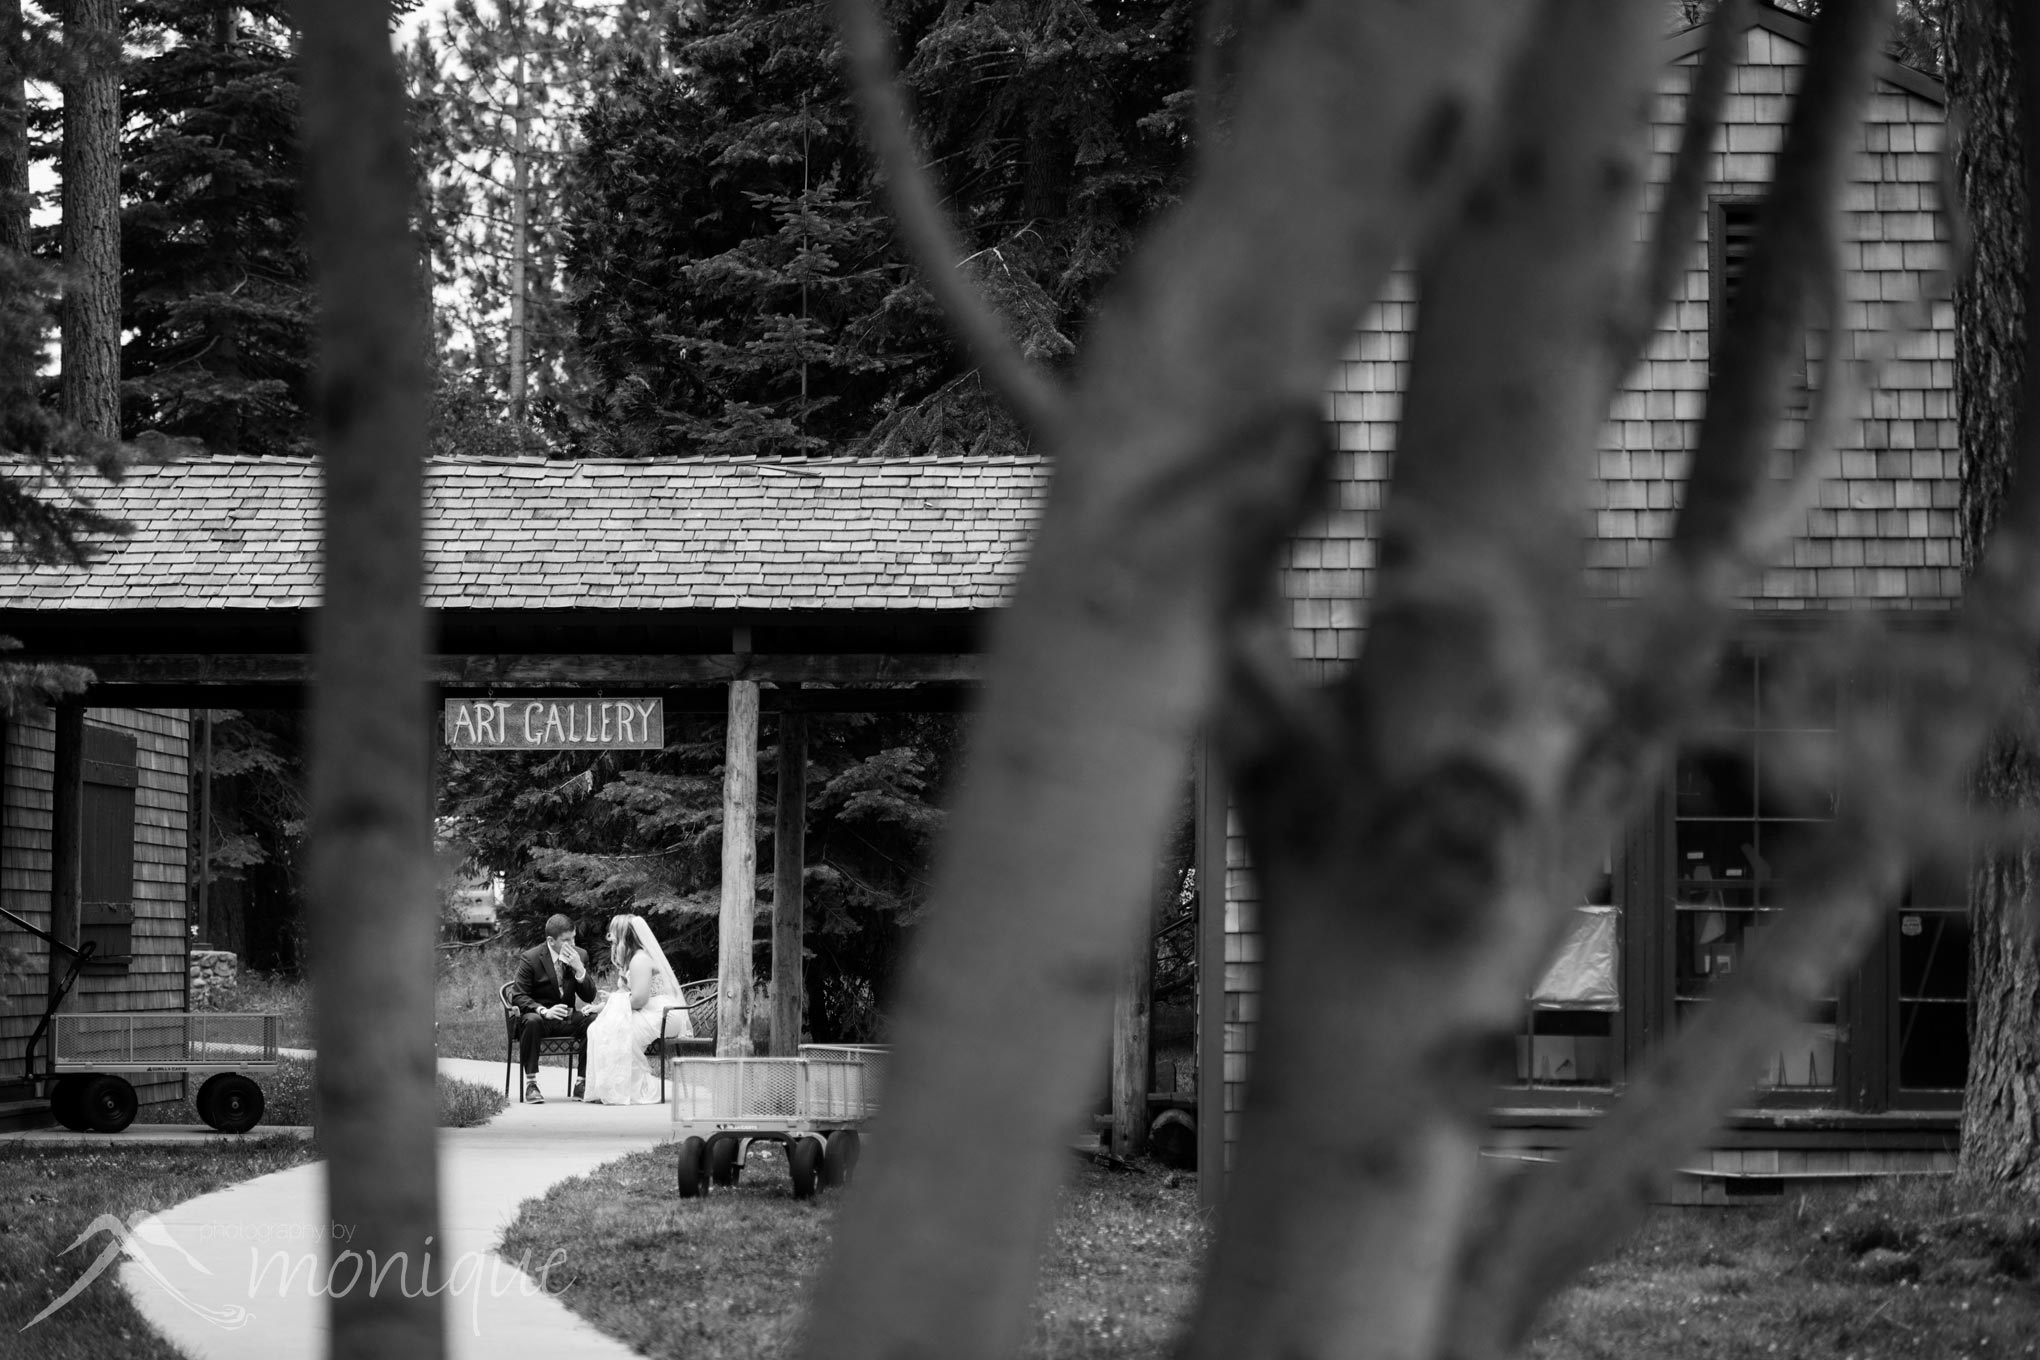 Valhalla wedding photography in South Lake Tahoe